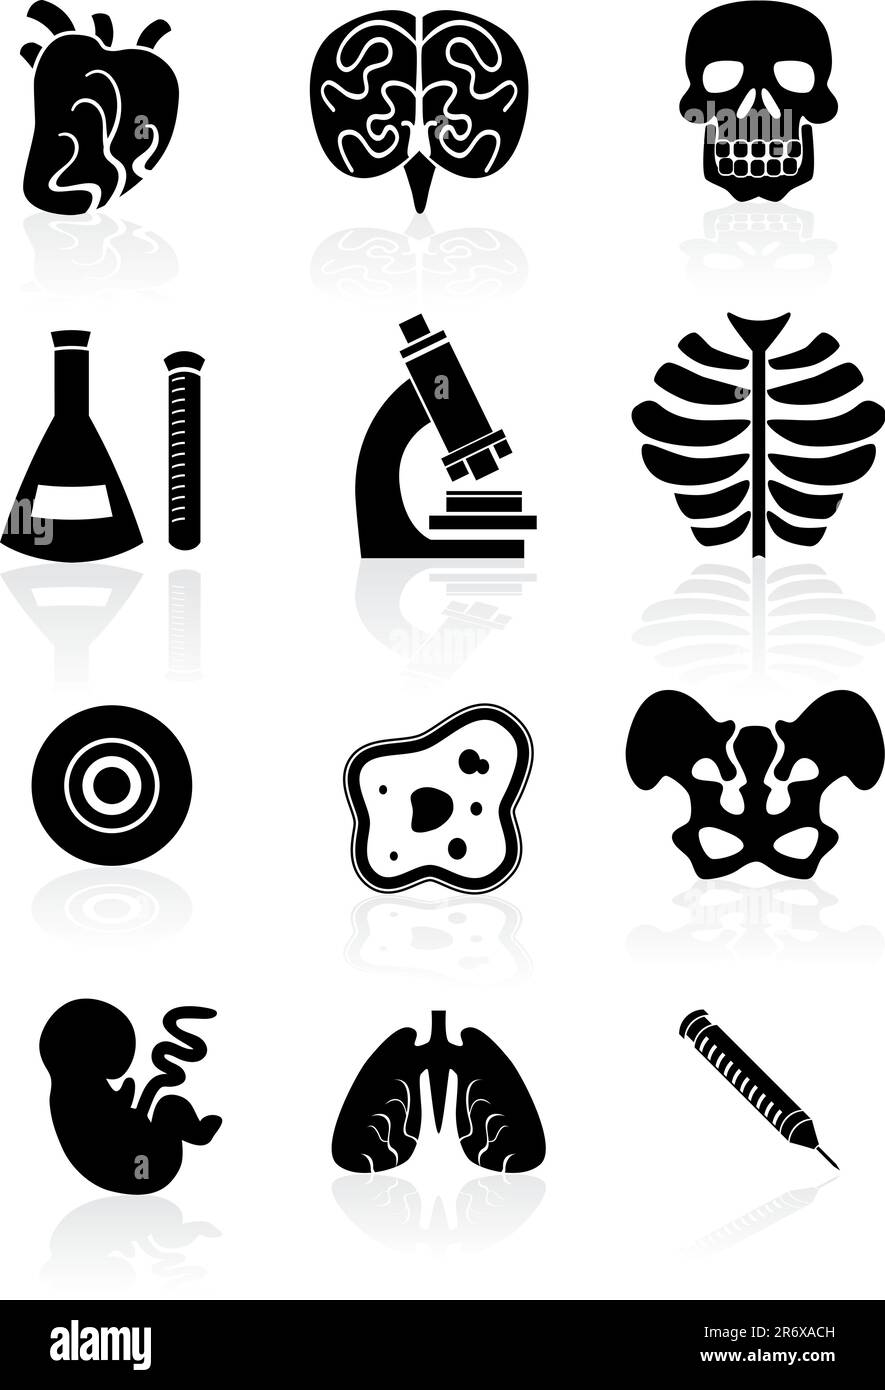 Biology themed buttons in a basic black color. Stock Vector